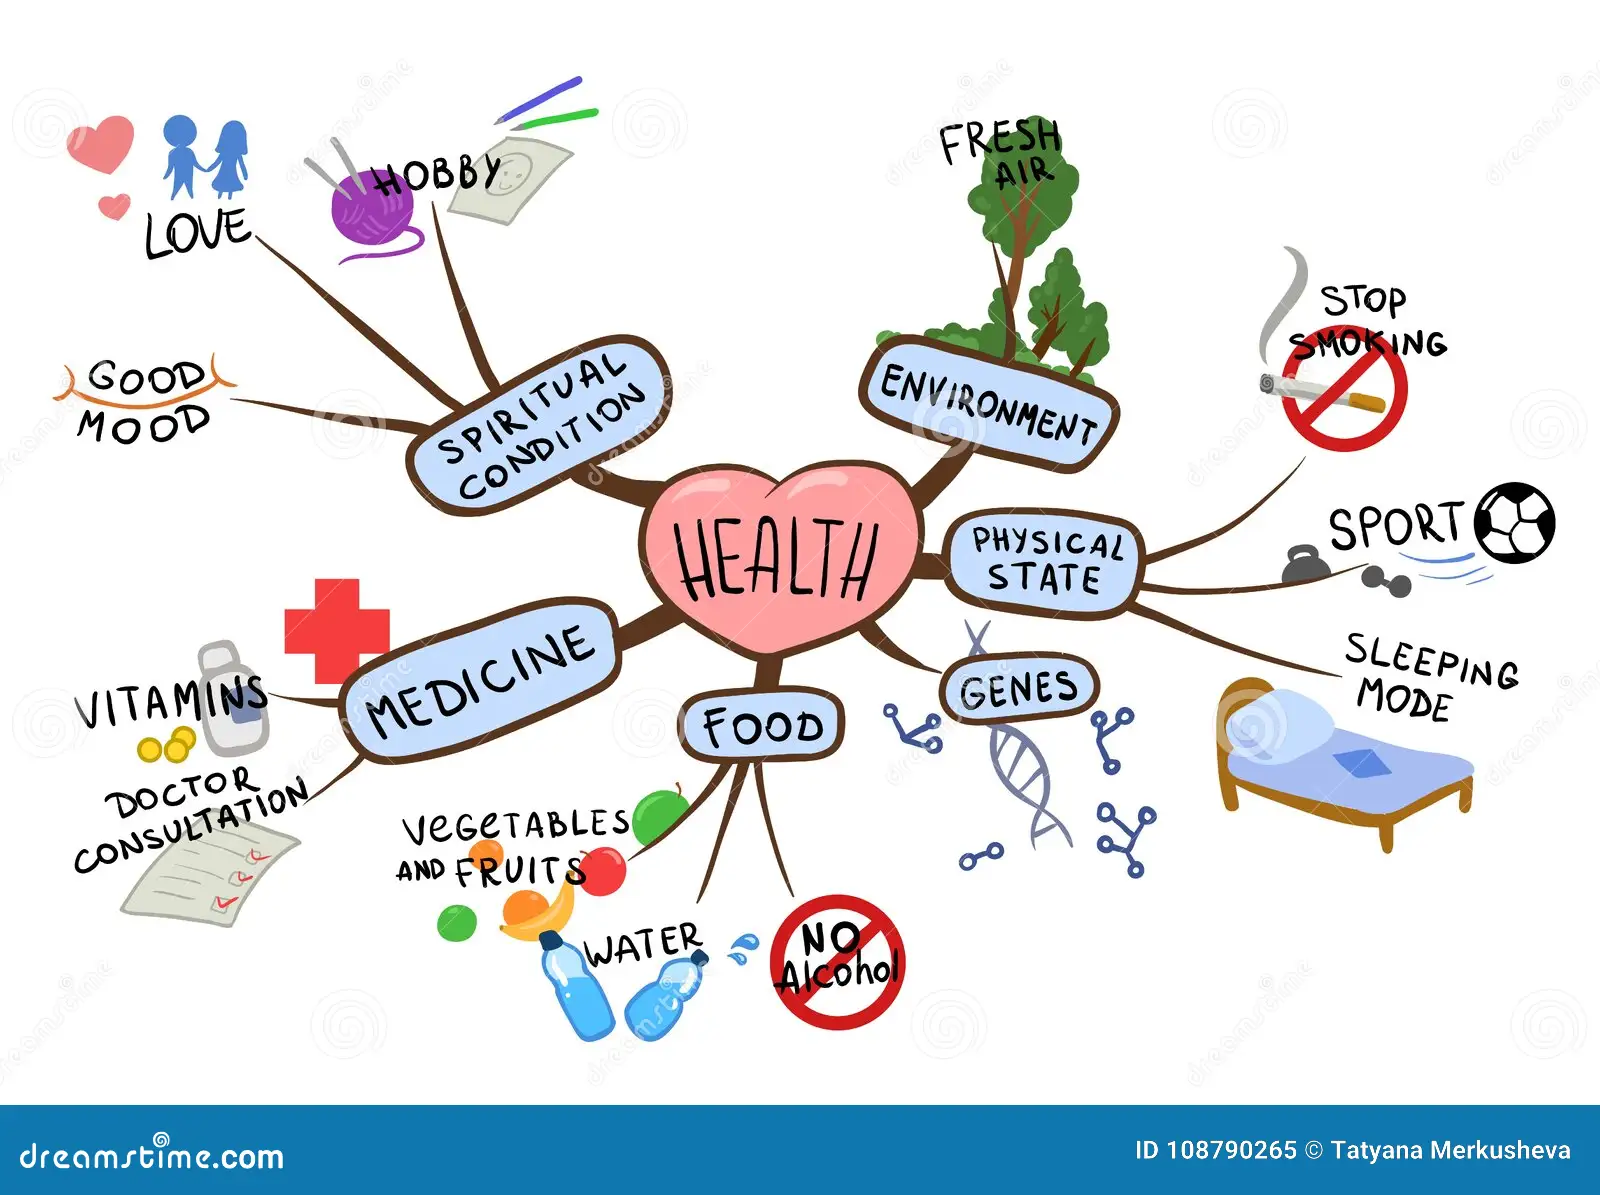 mind-map-topic-health-healthy-lifestyle-mental-map-vector-illustration-isolated-white-mind-map-topic-108790265